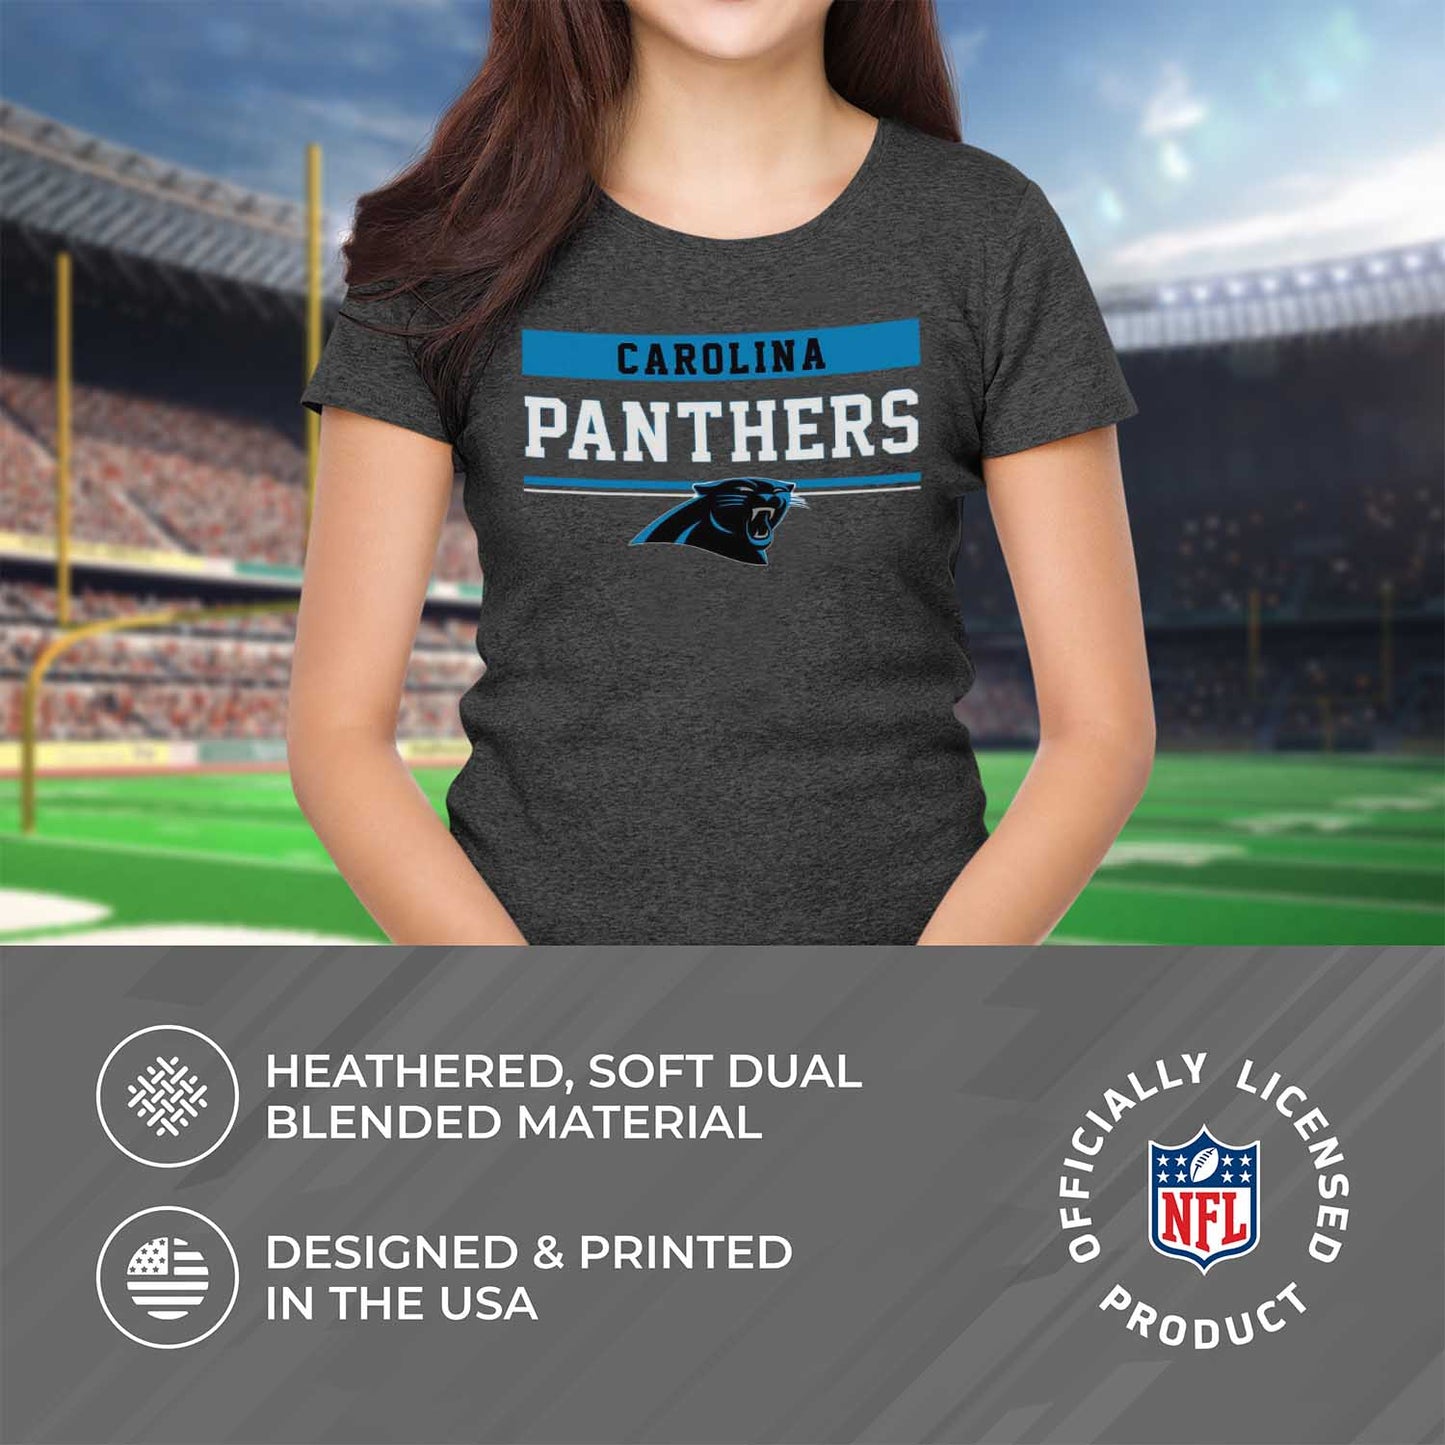 Carolina Panthers NFL Womens Charcoal Relaxed Fit Tshirt - Charcoal